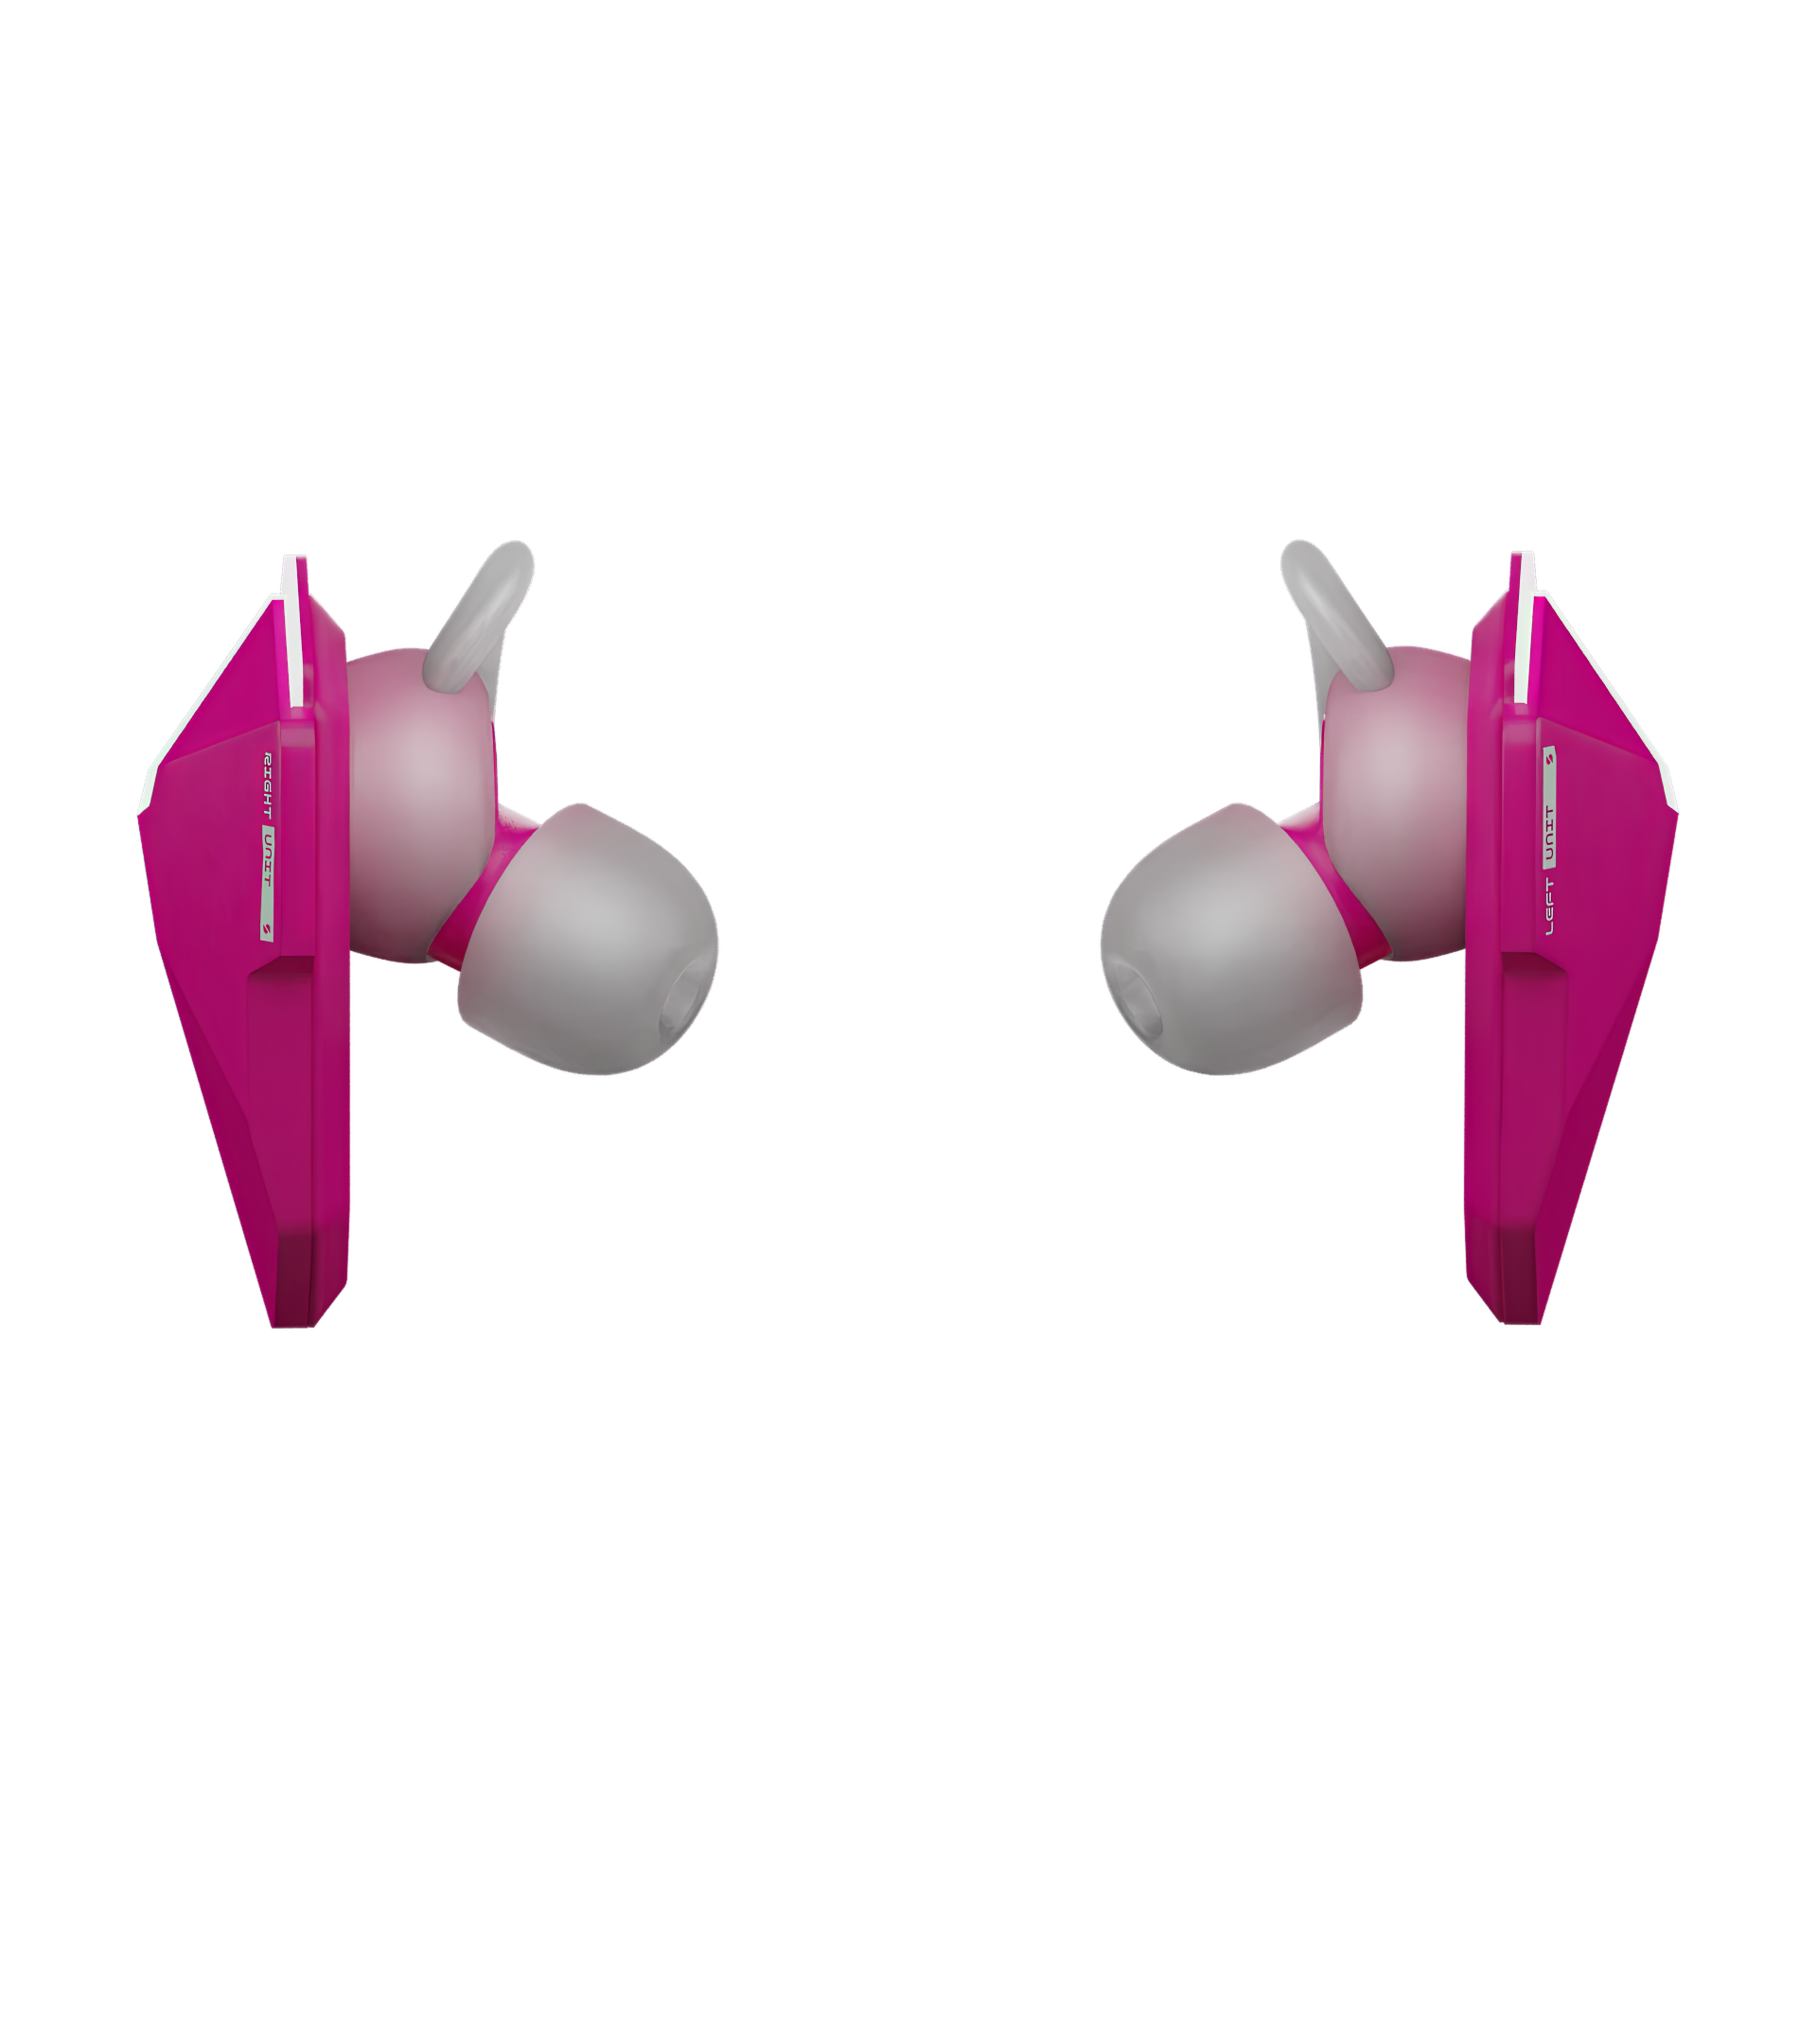 SANWEAR™ CHI in-ear Bluetooth earbuds top view